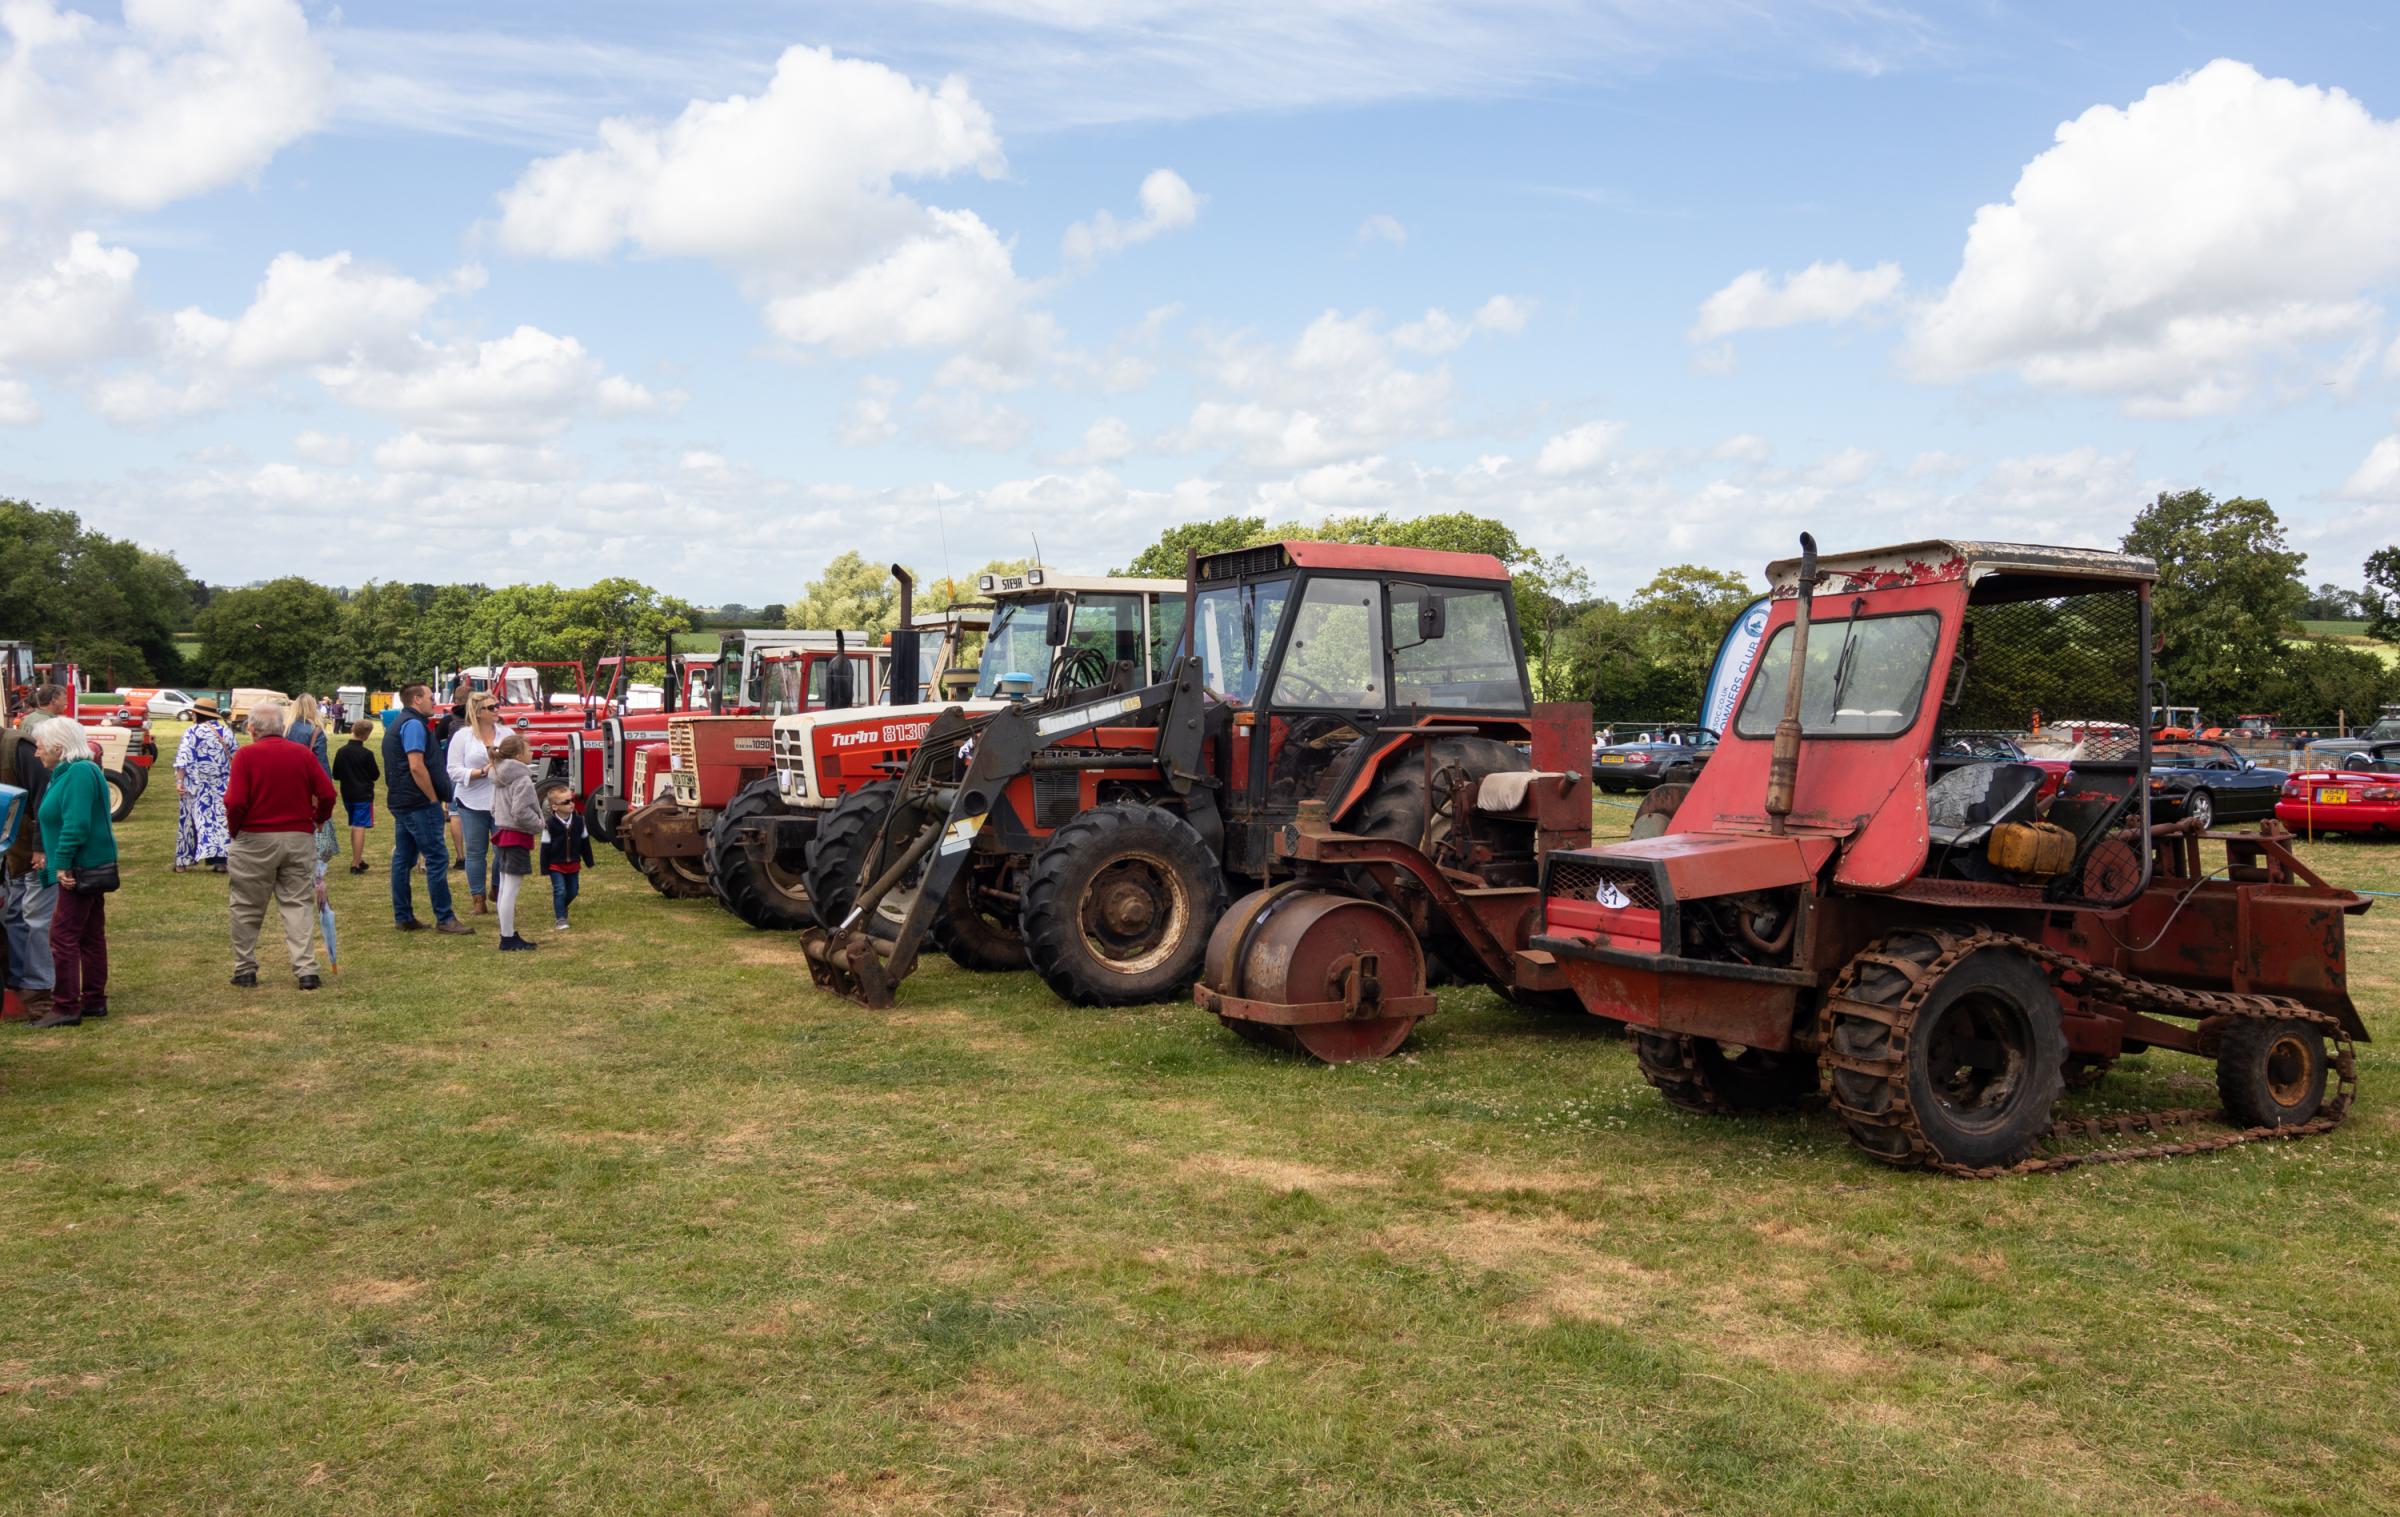 There were several different makes, from International and Massey Ferguson to John Deere and even two Unimogs. Picture: Sofie Smith